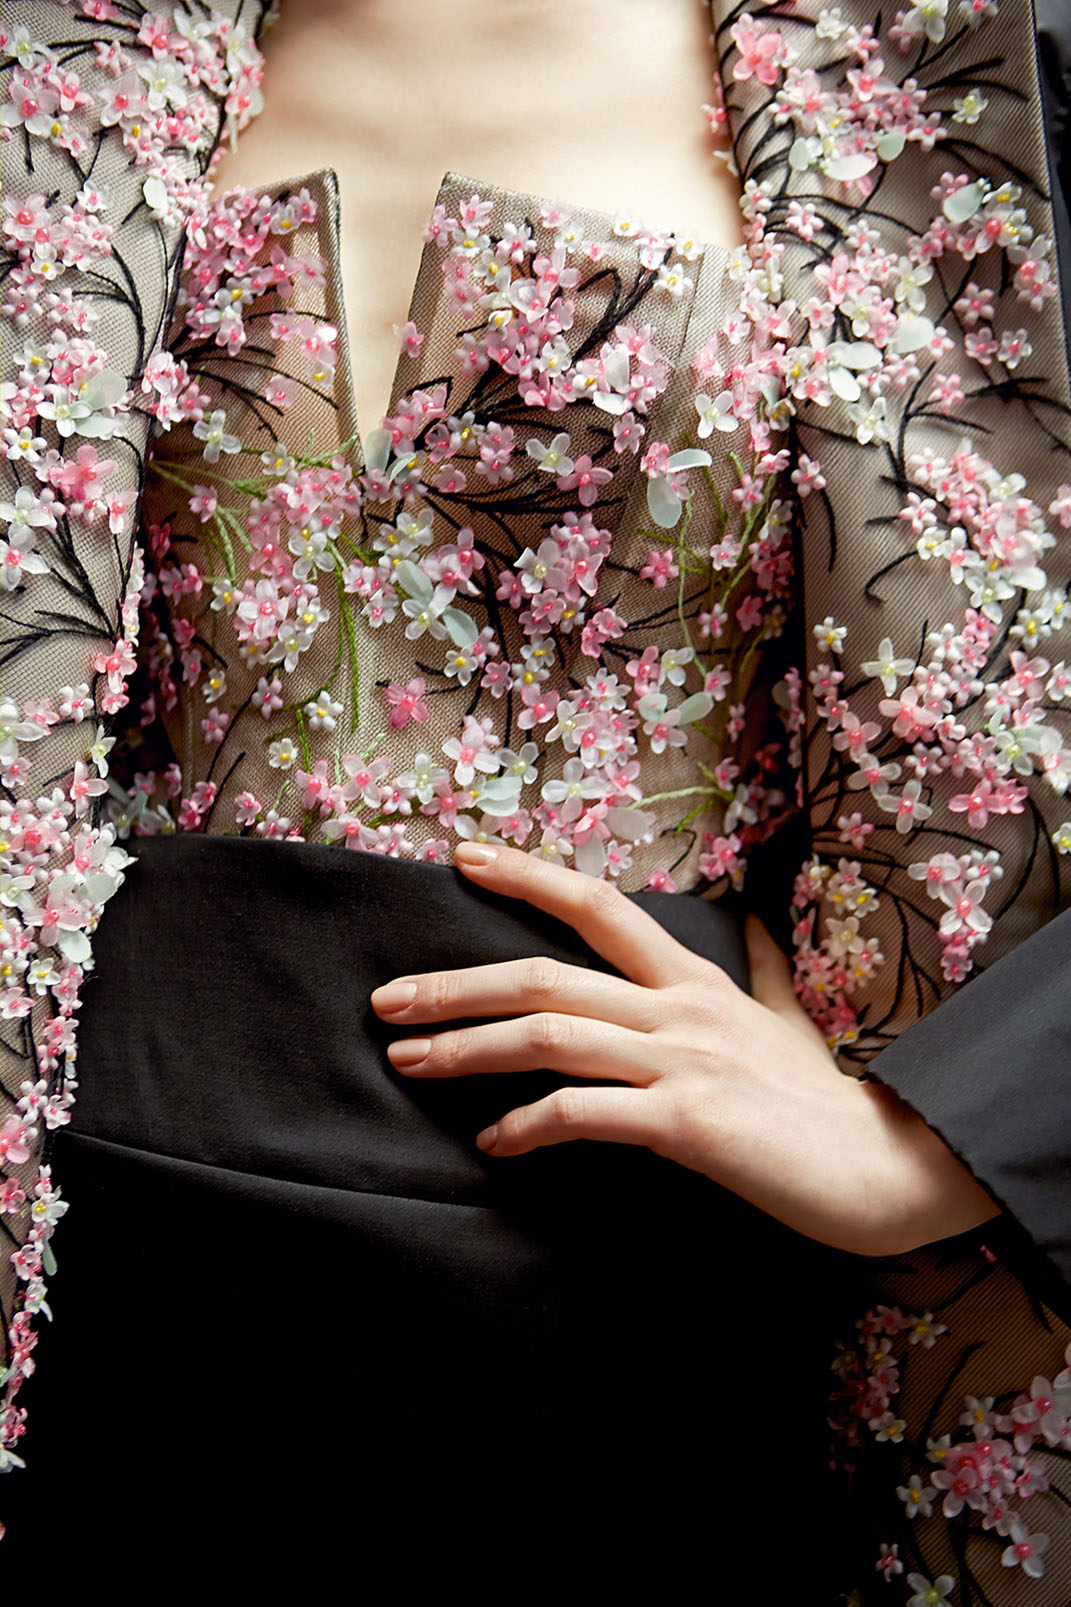 High fashion photo of a model wearing a floral Dior blouse and black skirt